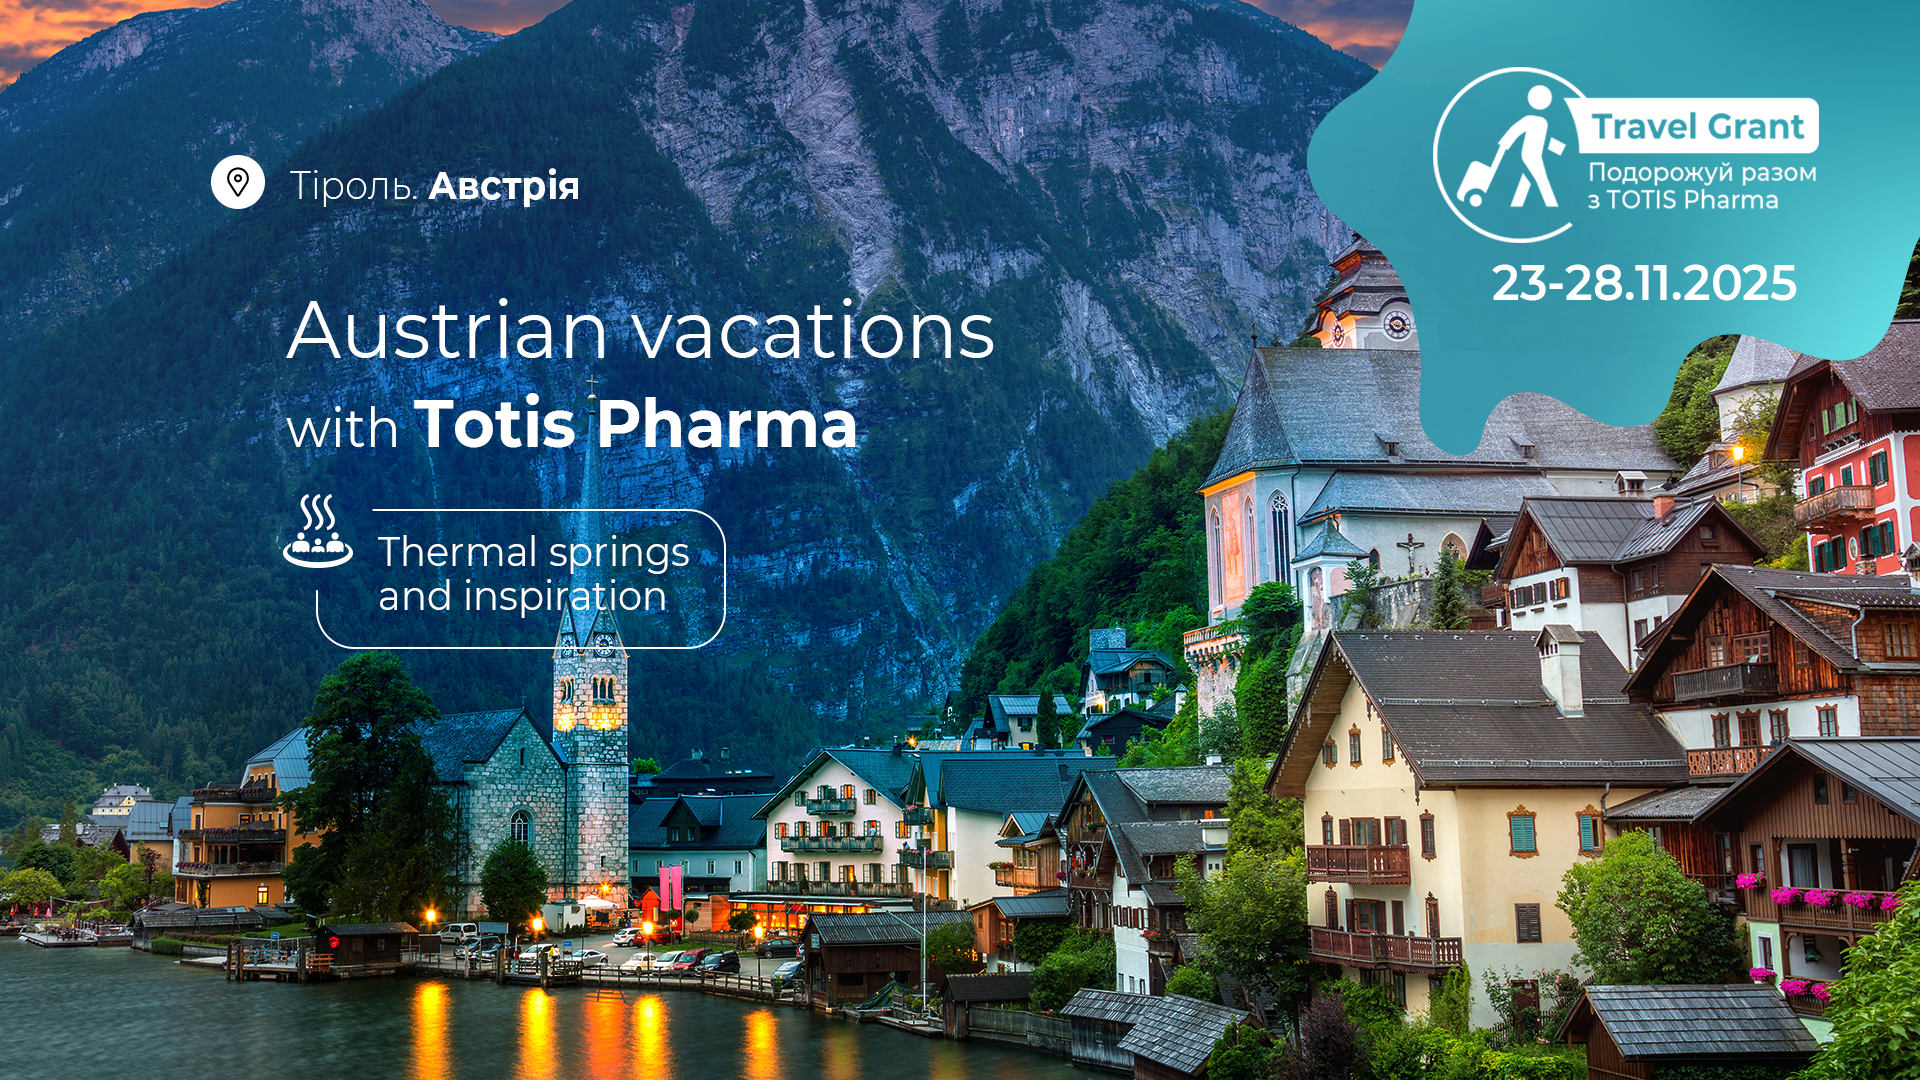 Austrian vacations with Totis Pharma. Thermal springs and inspiration